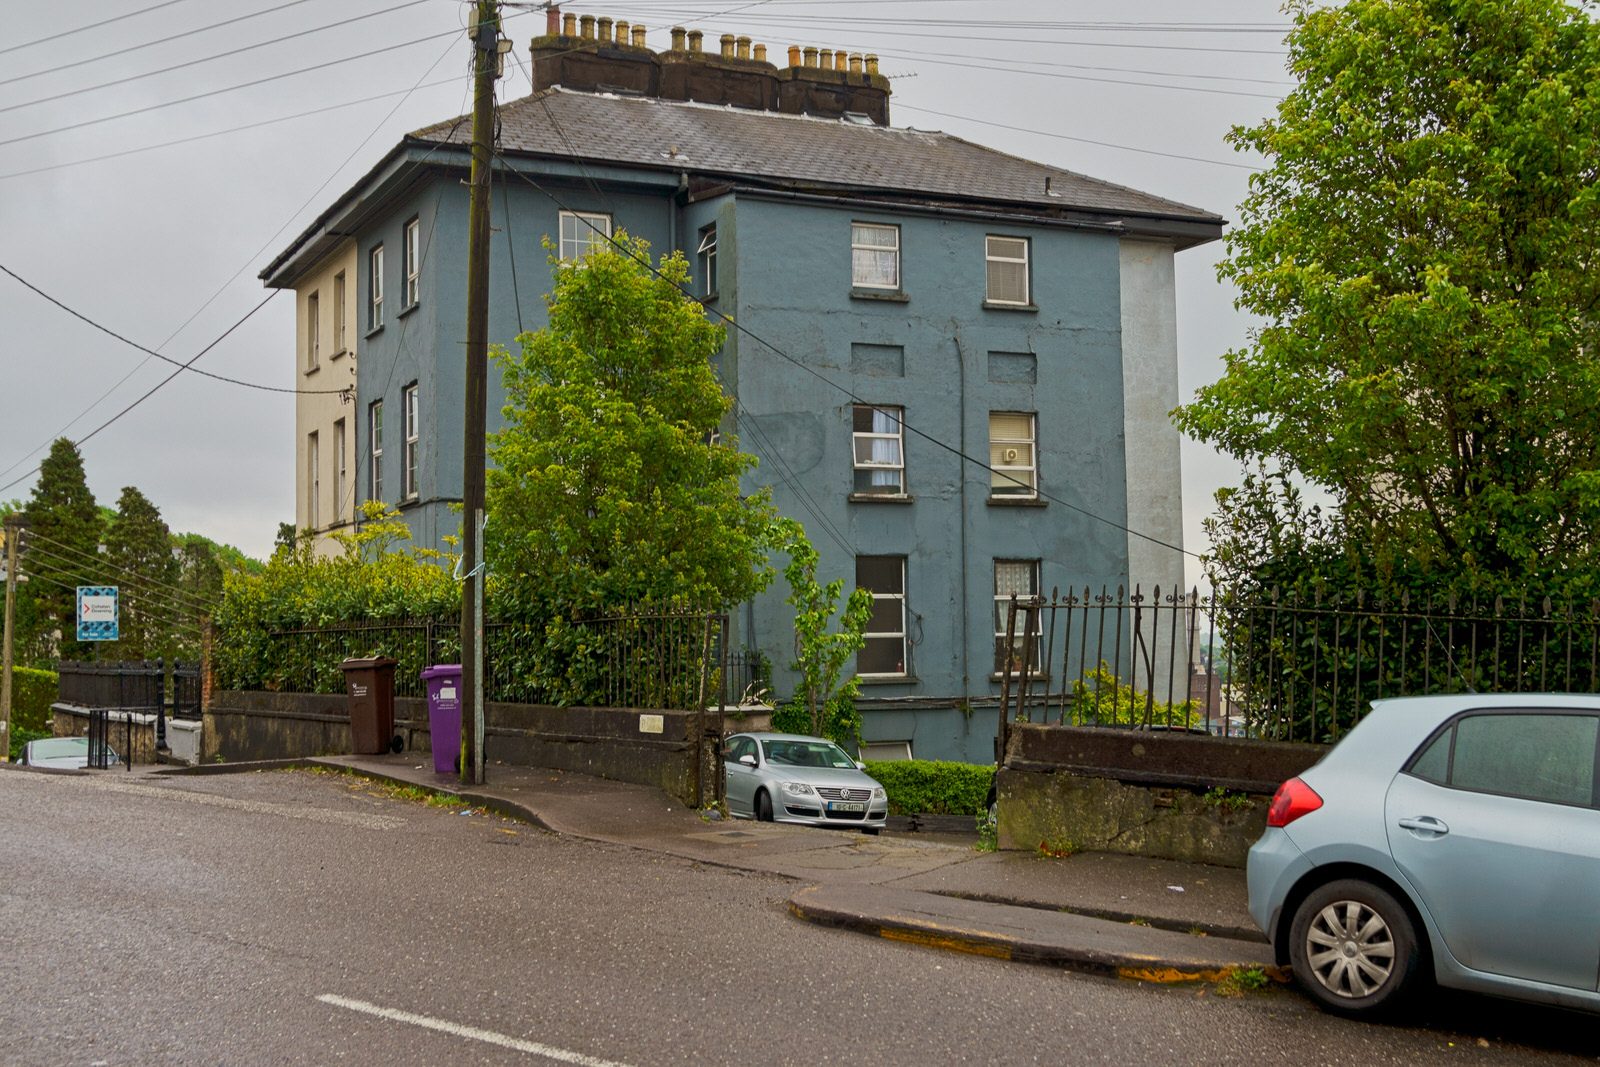 A WALK ALONG SUMMERHILL NORTH [IN CORK EVERYWHERE IS UPHILL OR DOWNHILL]-225800-1